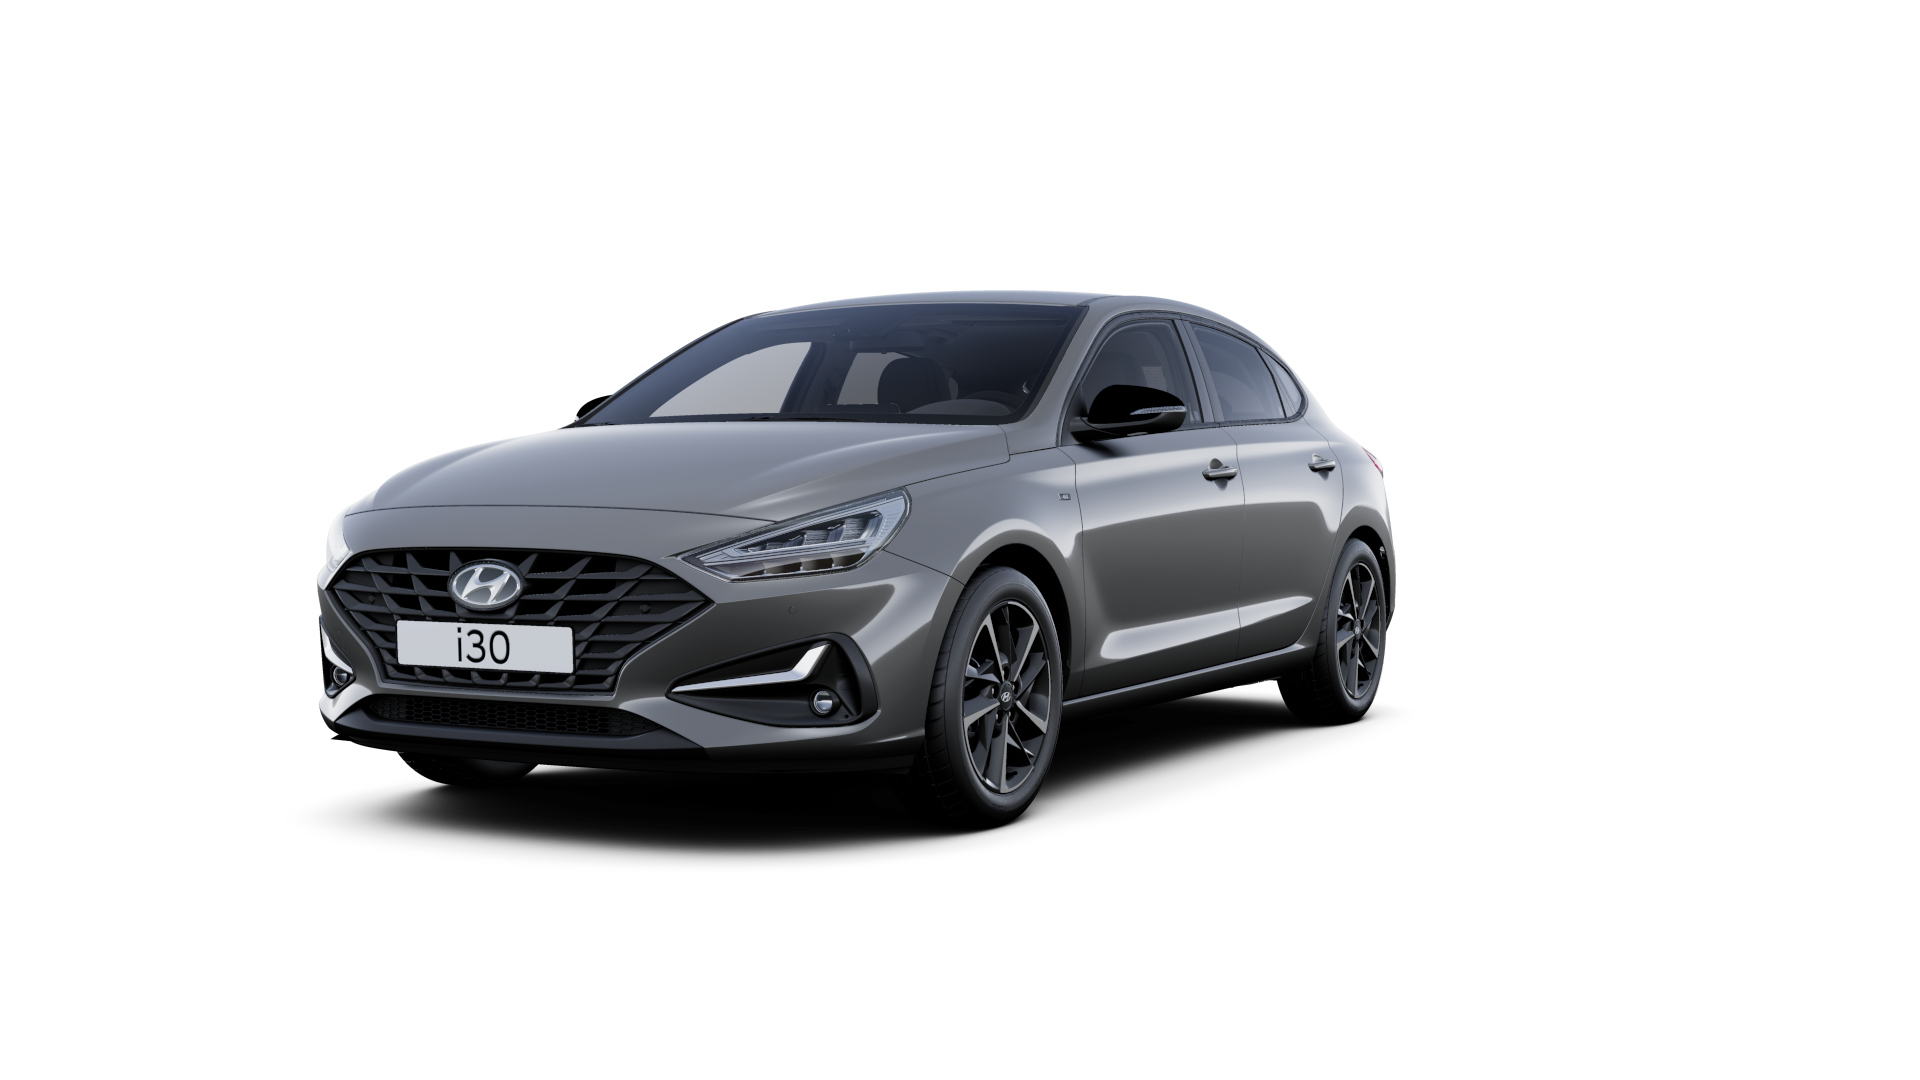 Front side view of the new Hyundai i30 Fastback in the colour Amazon Grey.